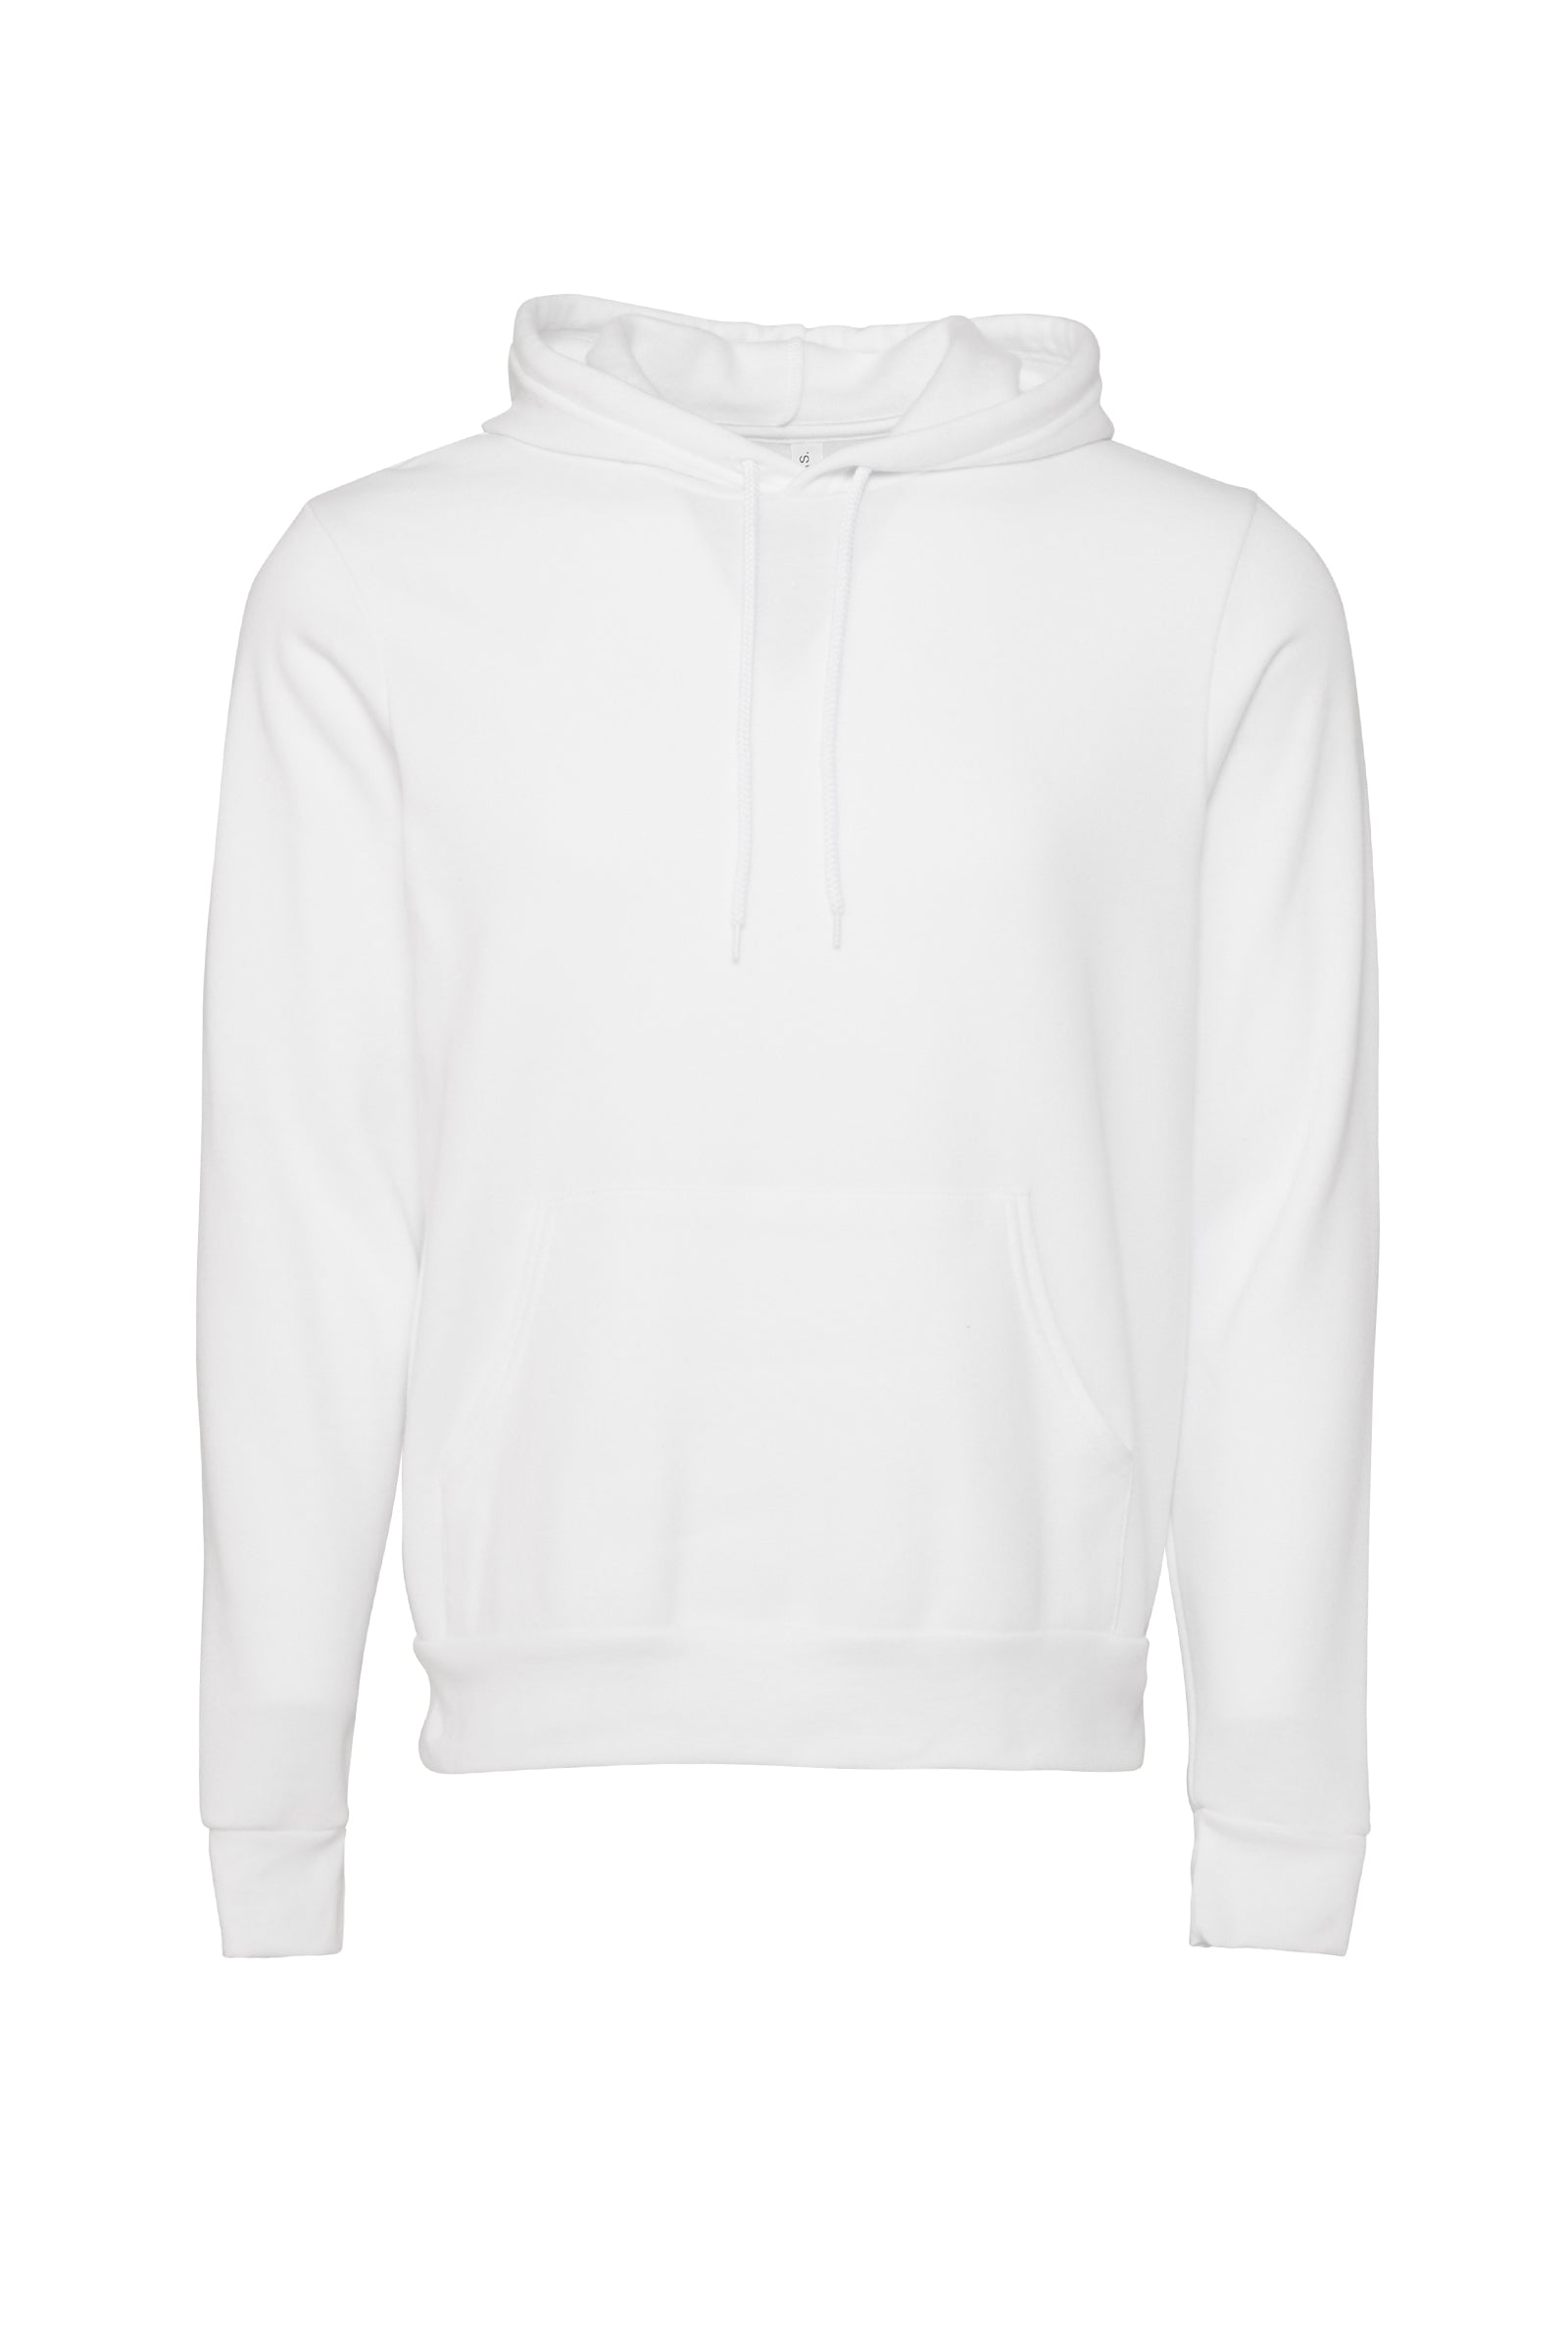 PROJECT 100 HOODIE